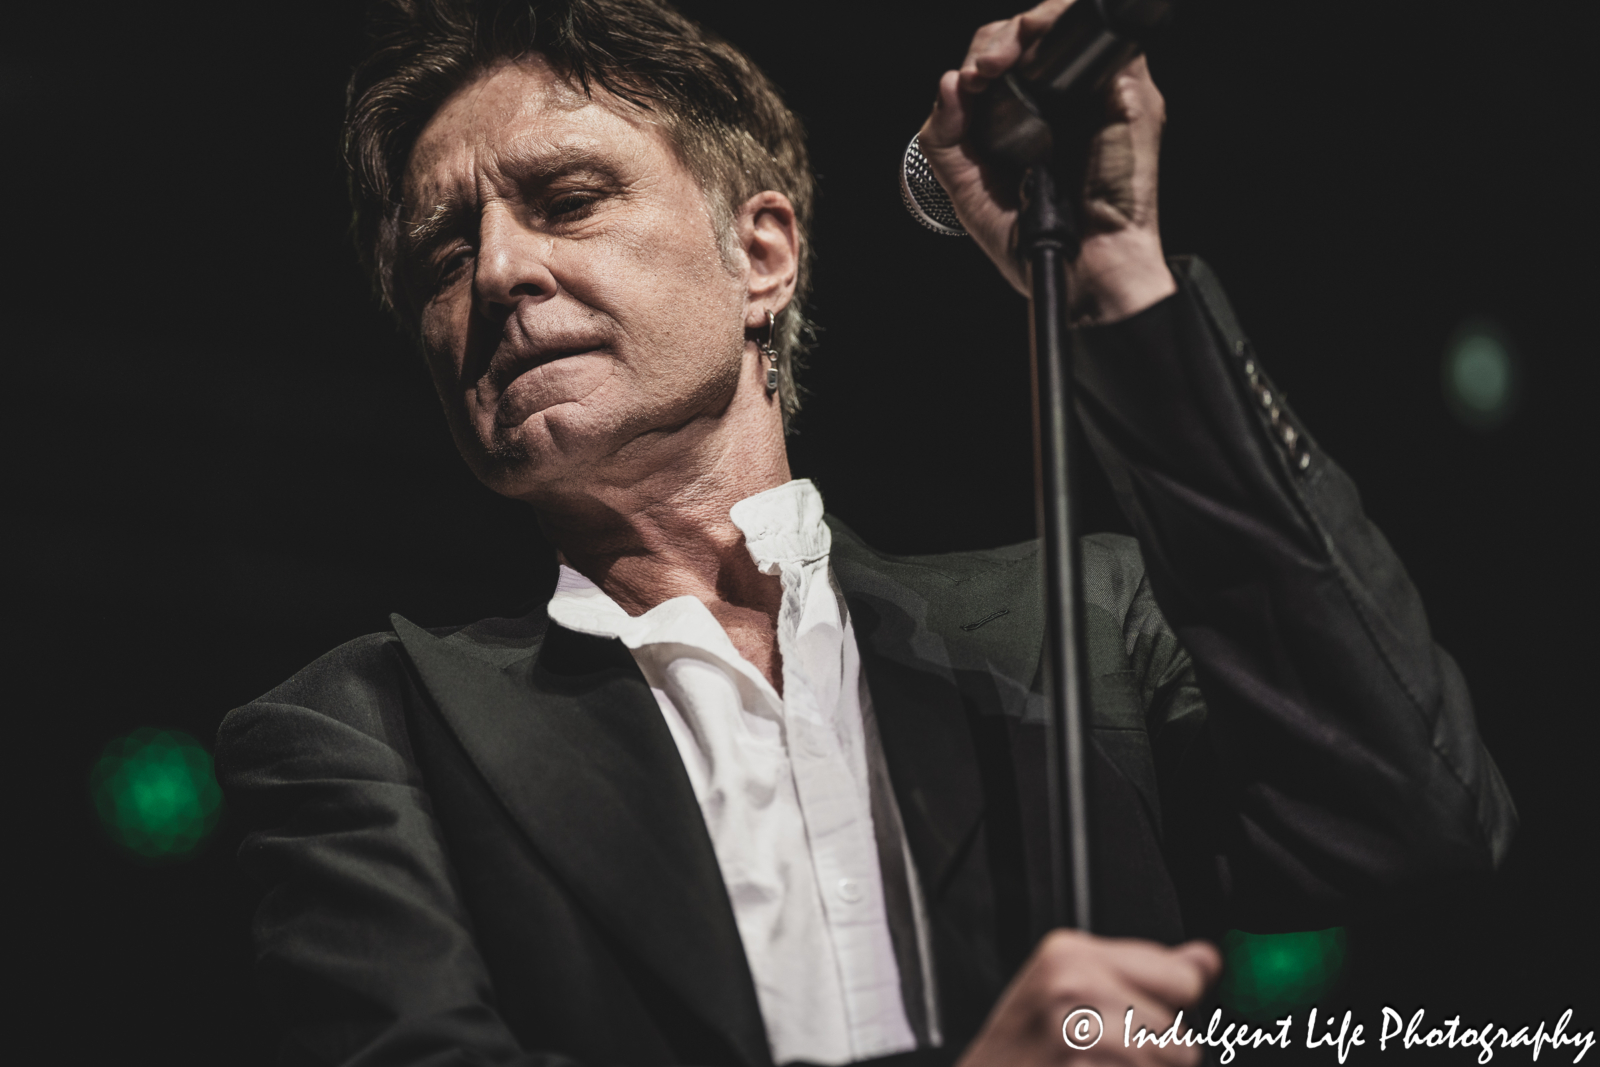 John Waite performing live during his "Missing You" 40th Anniversary tour stop at Star Pavilion inside of Ameristar Casino in Kansas City, MO on December 8, 2023.